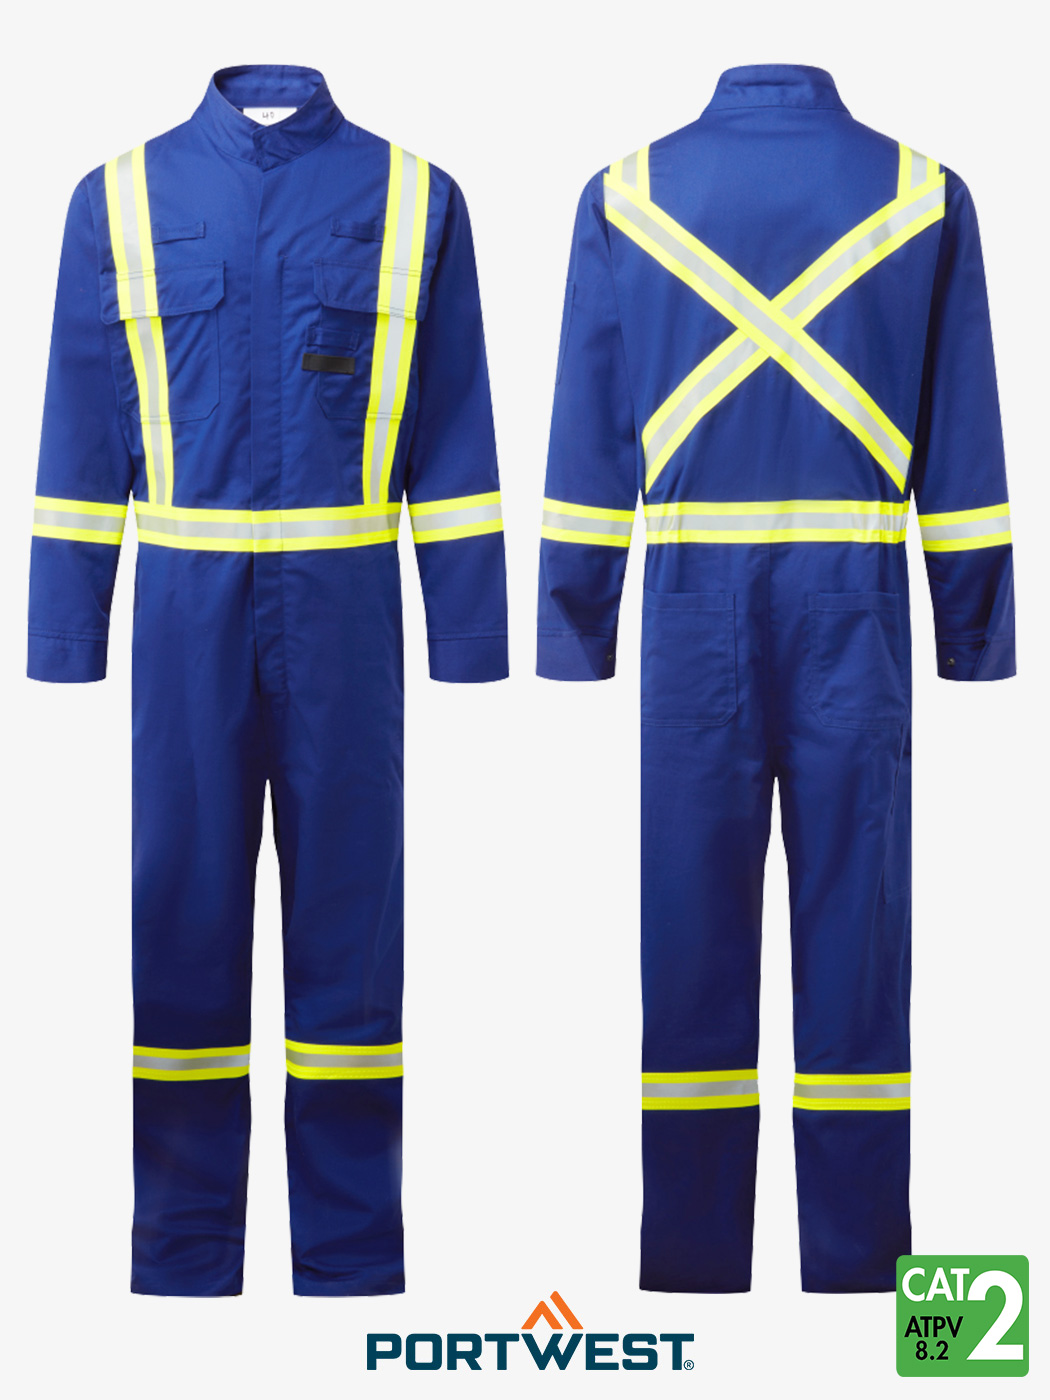 Bizflame® 88/12 Iona Xtra 7 oz FR Coverall- Style FR511